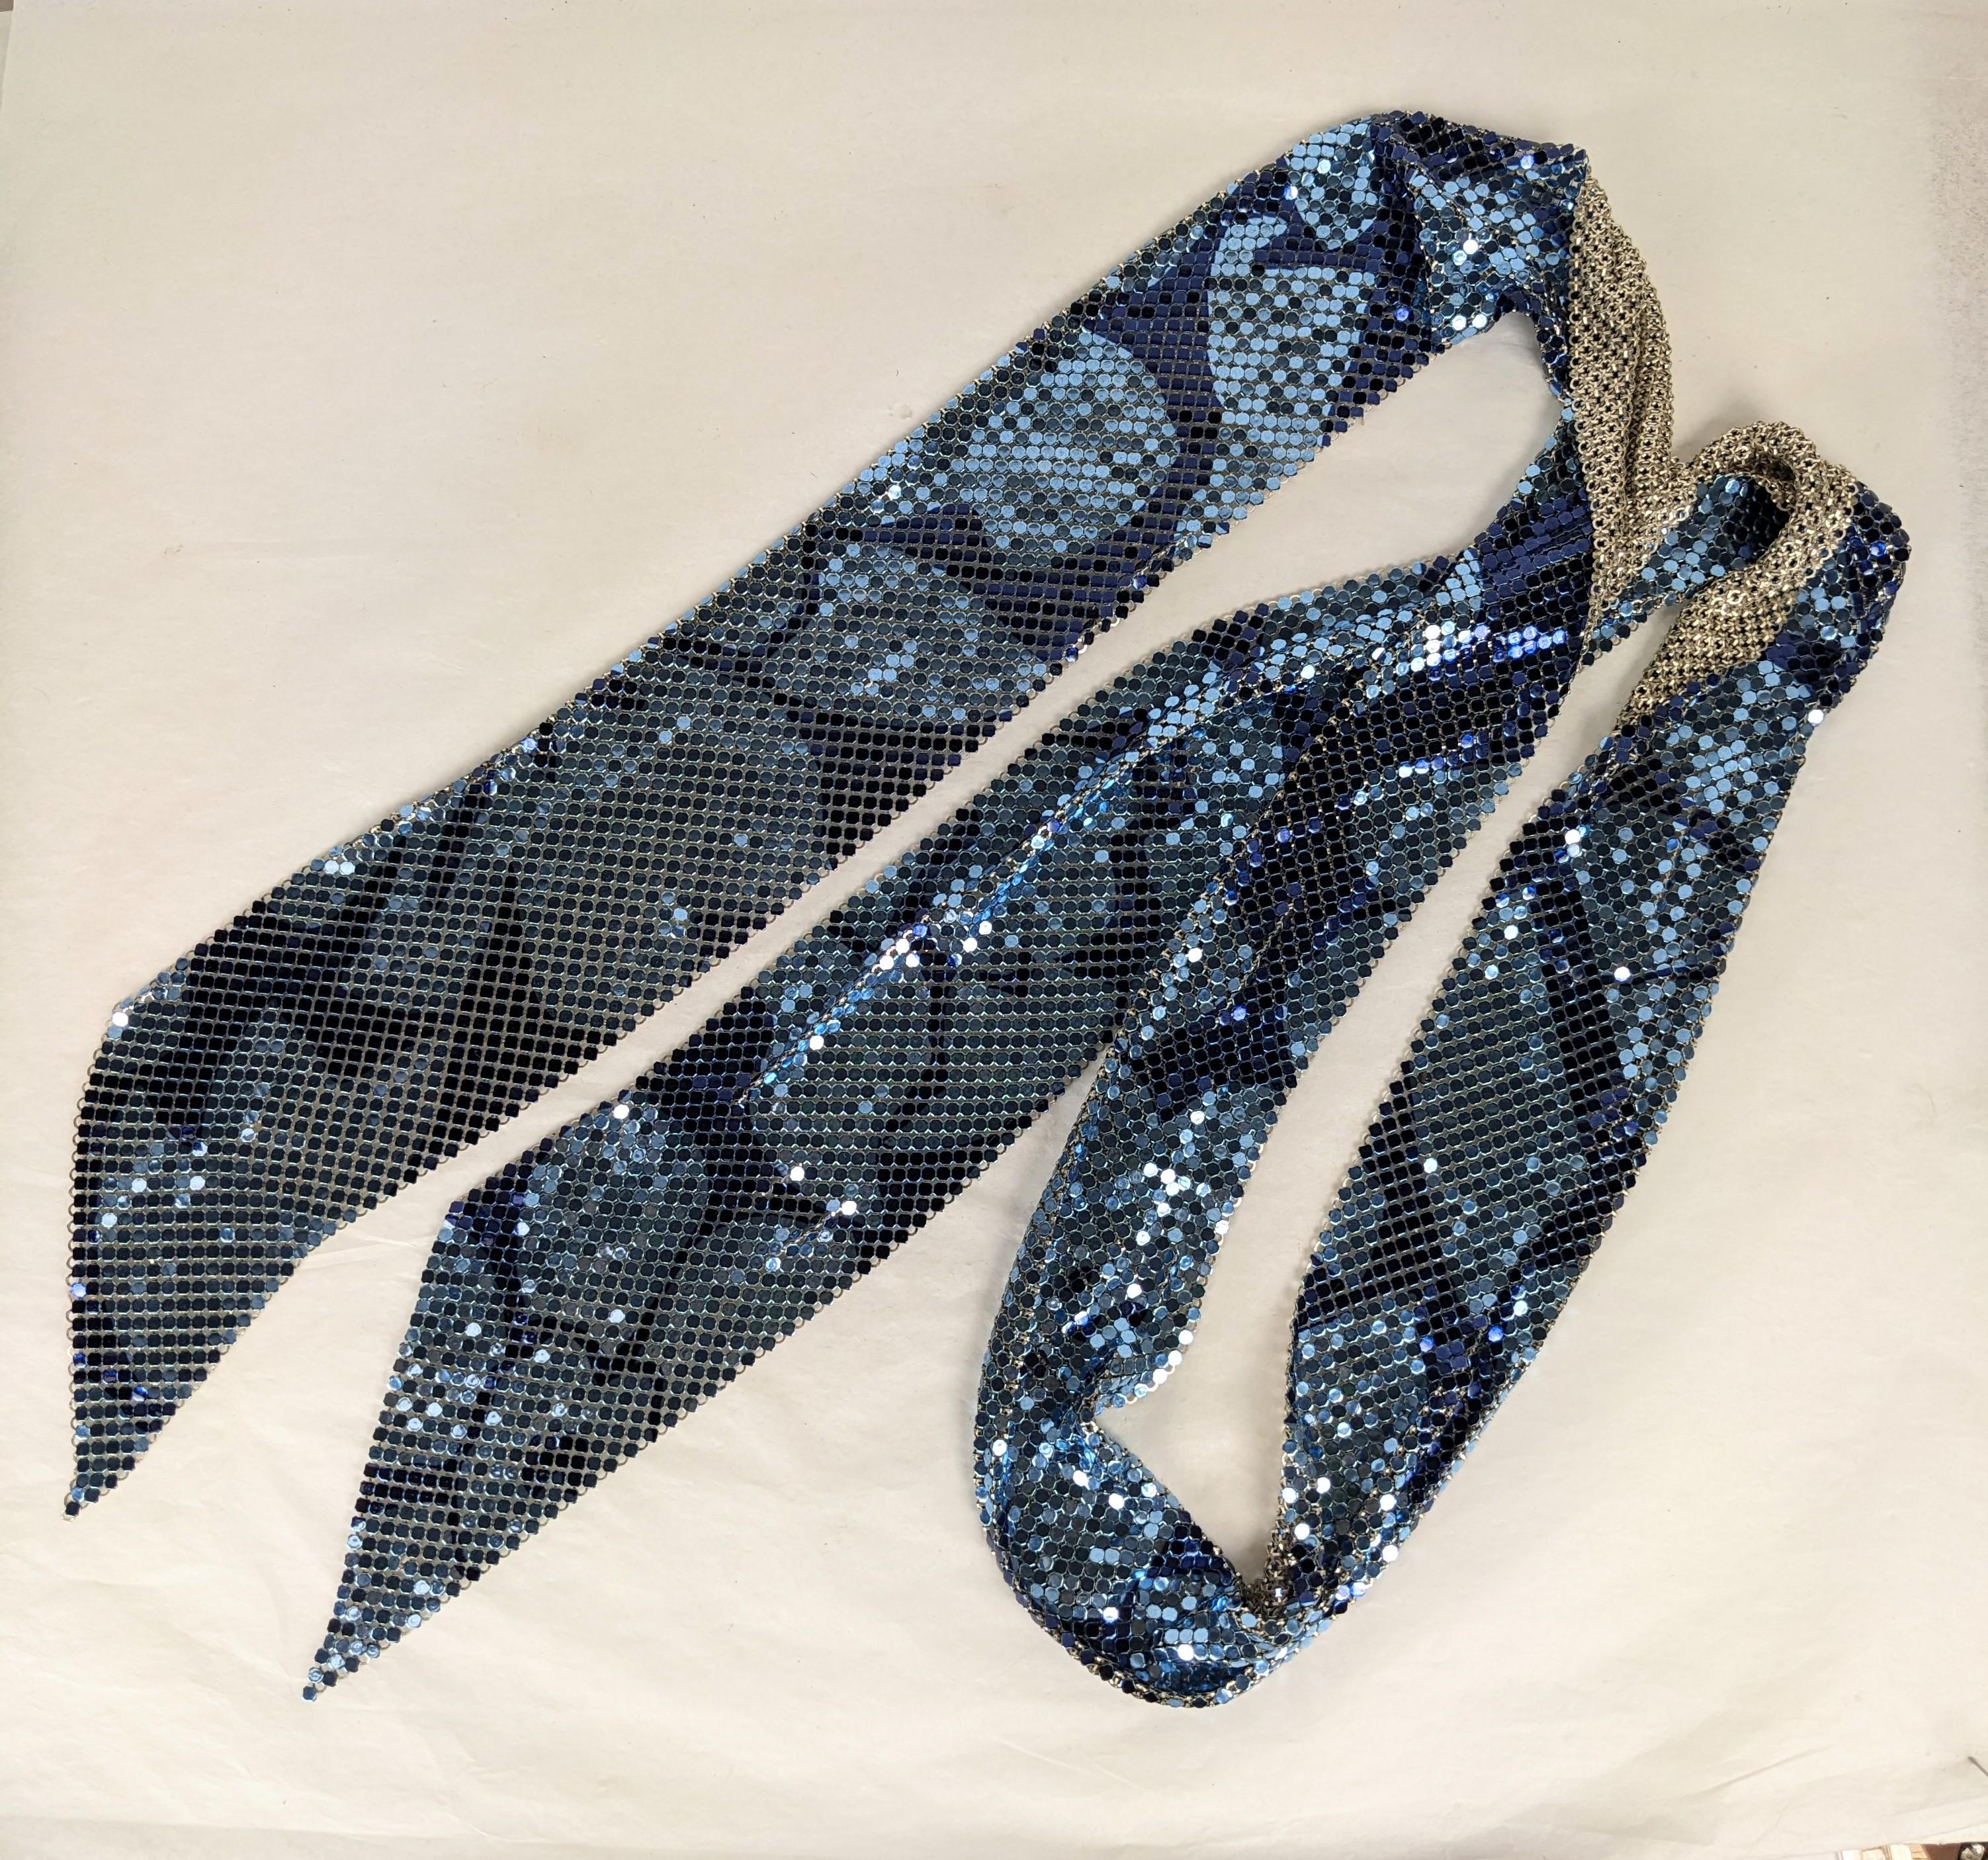 Super versatile Enamel Metal Mesh Neck Scarf with abstract florals in blue tones likely by Whiting Davis. Liquid printed metal mesh, perfect to upgrade any outfit. 1980's USA. 56